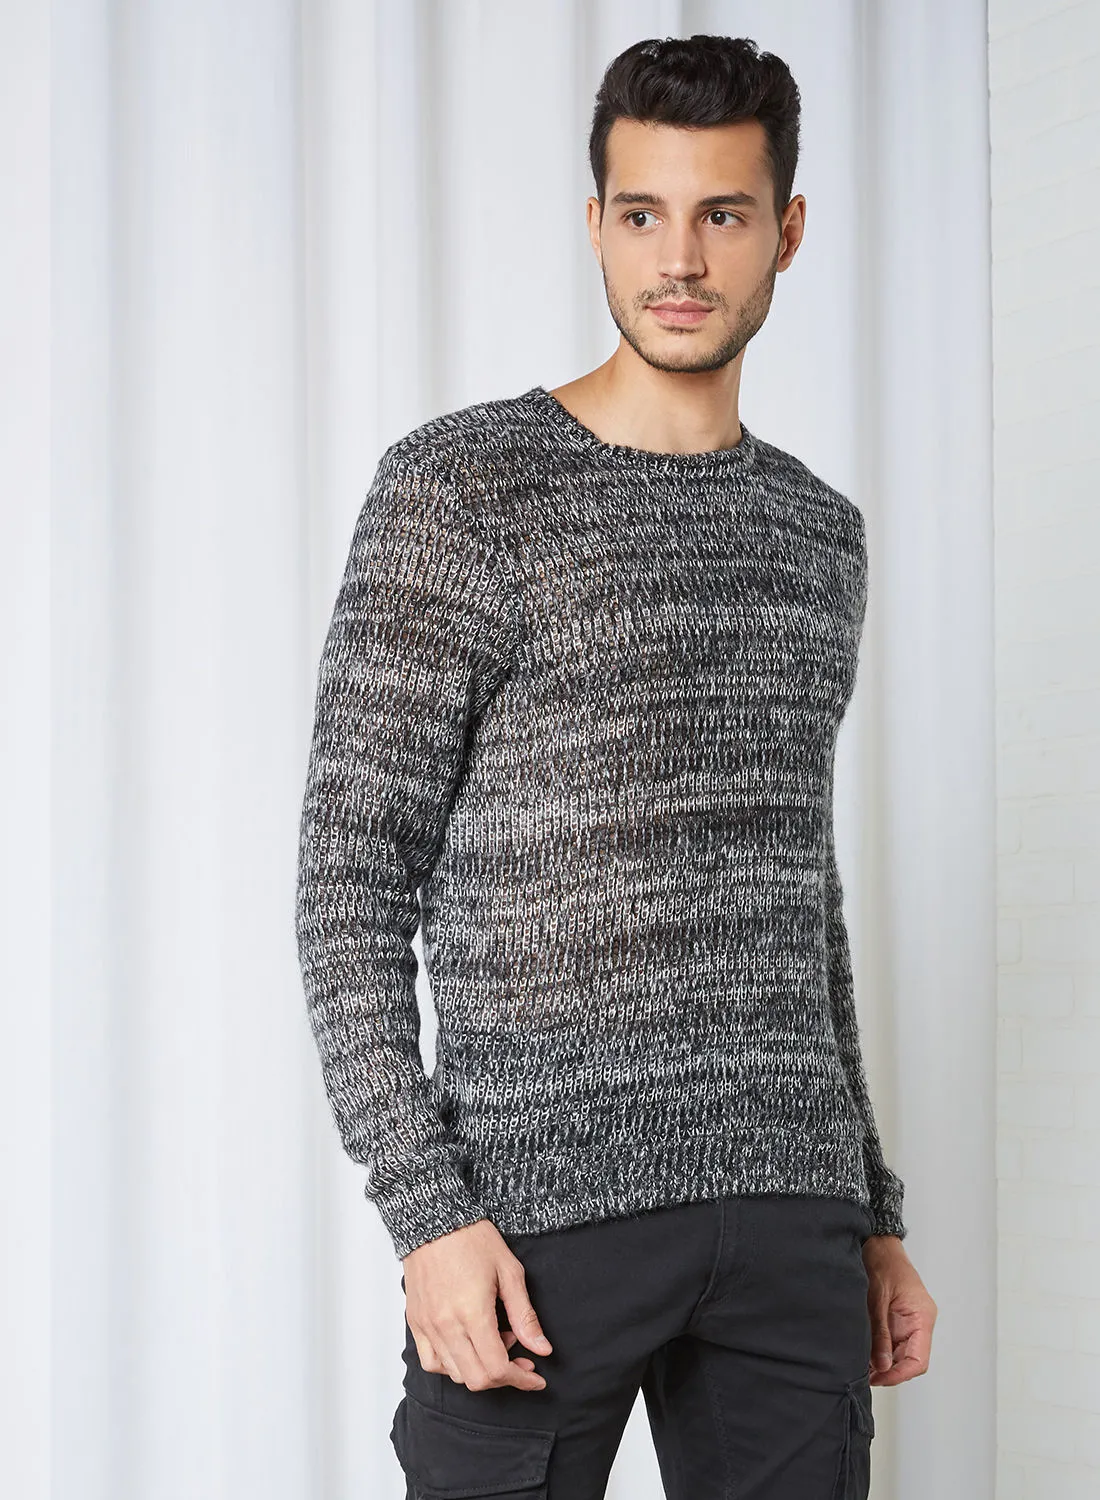 STATE 8 Textured Sweater رمادي